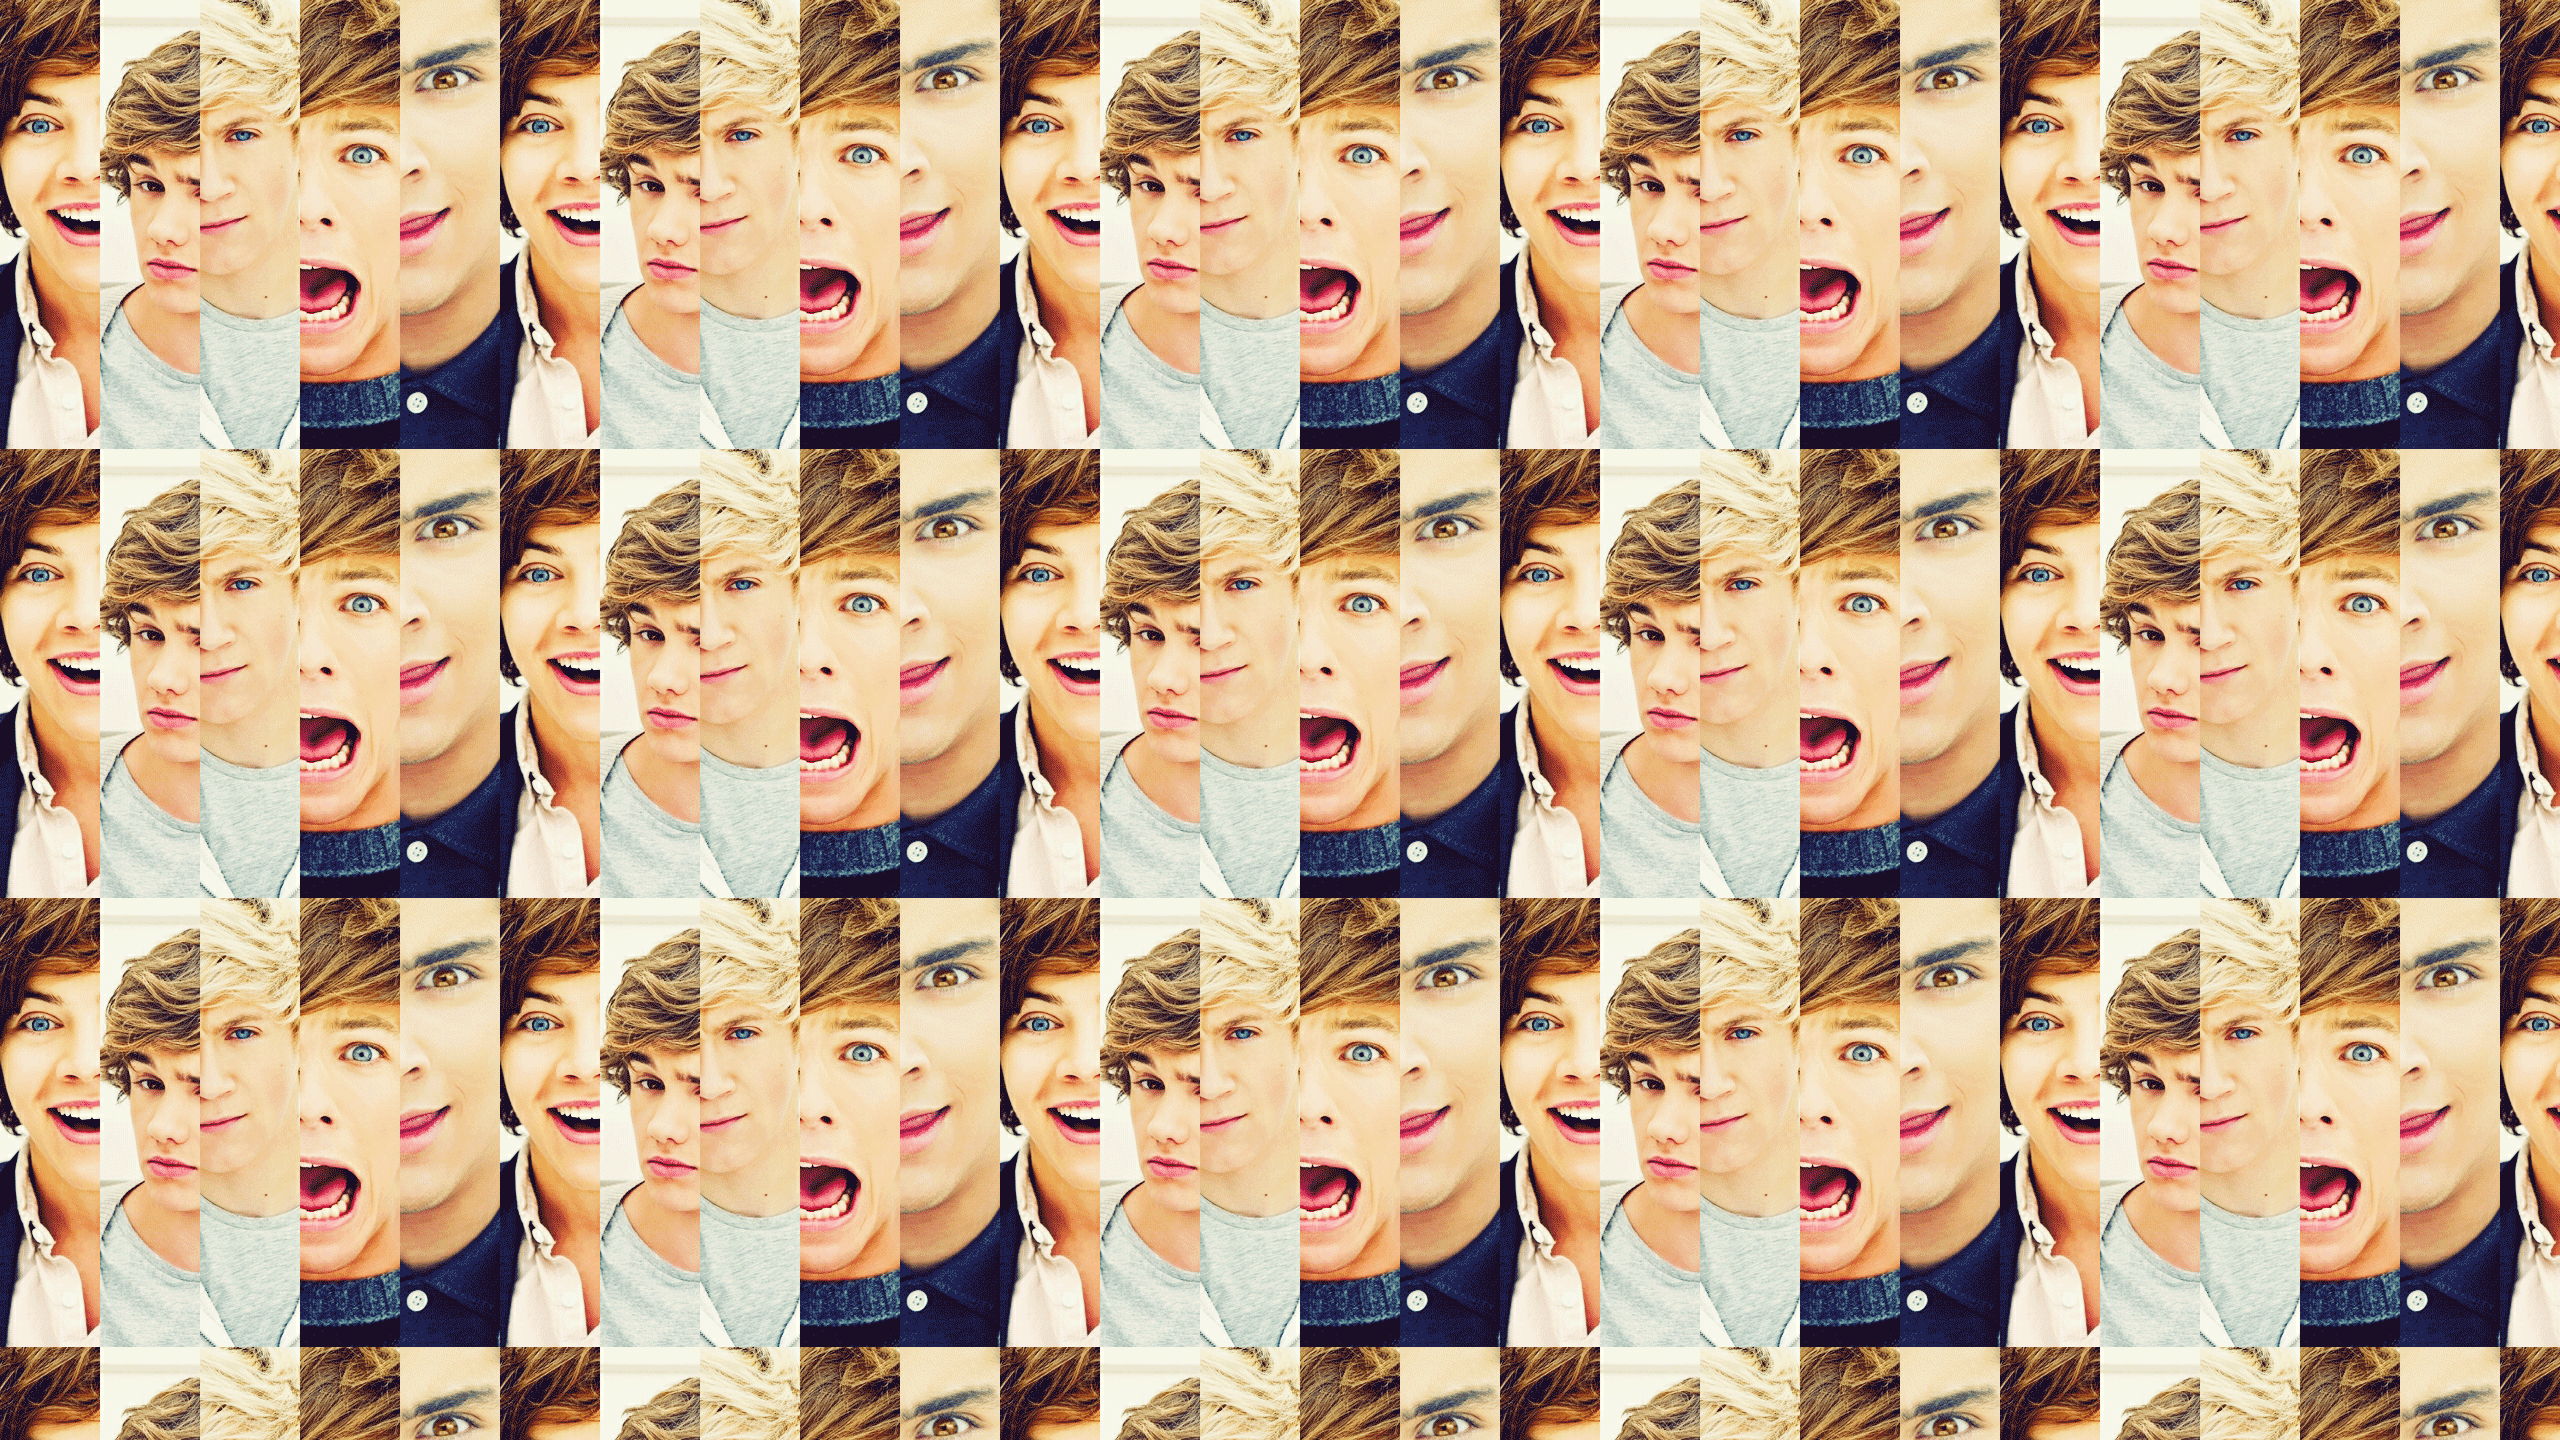 This One Direction Desktop Wallpaper Is Easy Just Save The